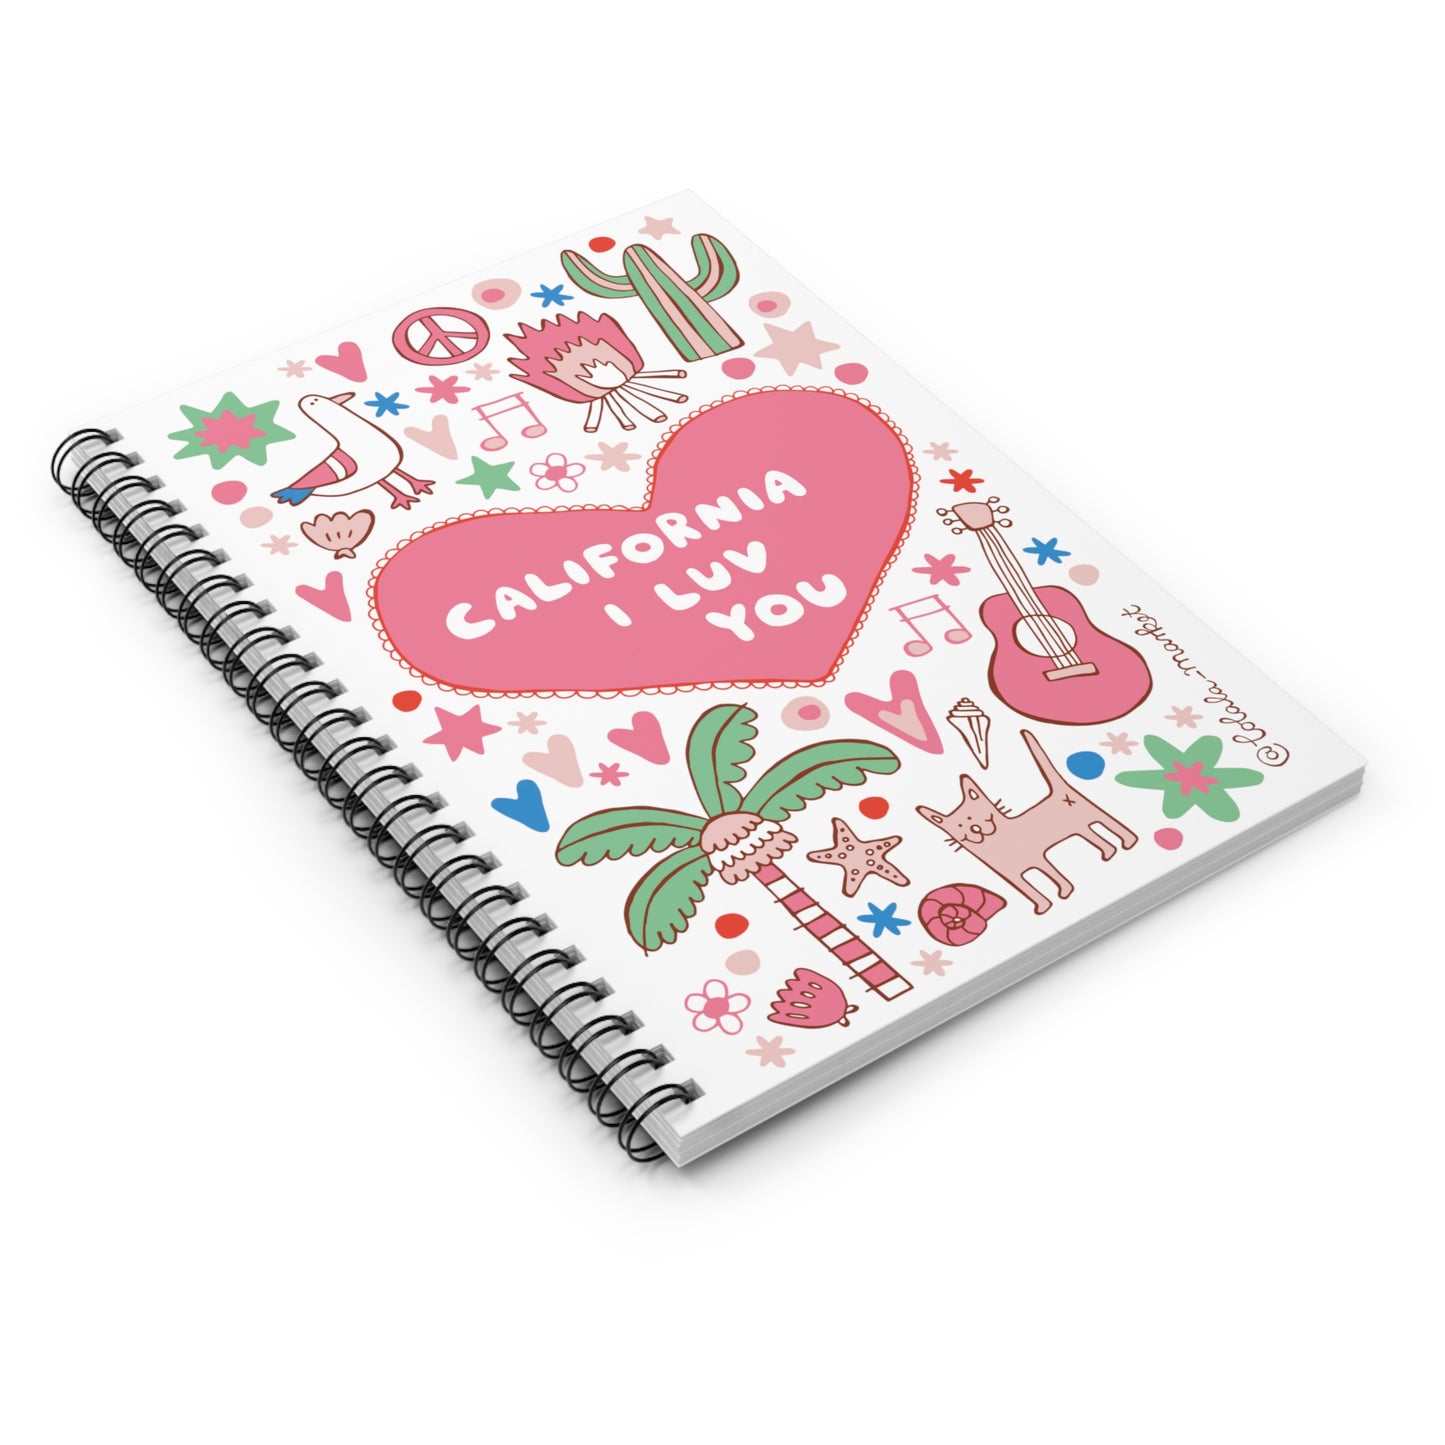 California I Luv You - Spiral Notebook (Ruled Line)